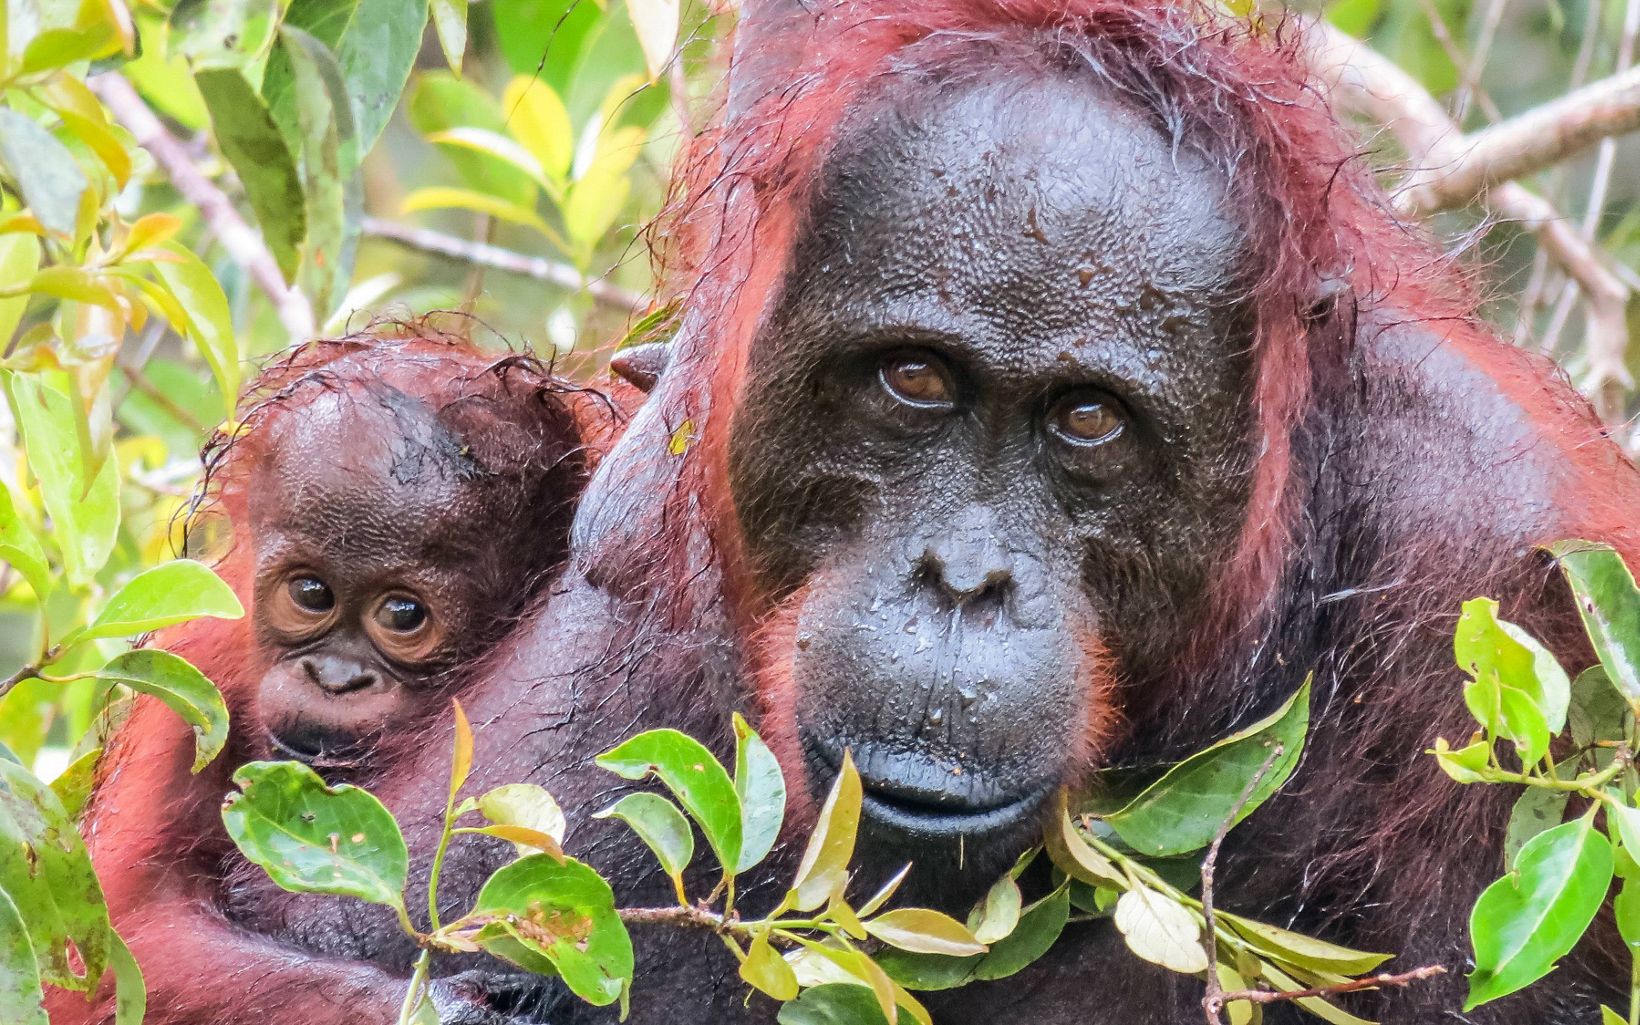 An orangutan and baby  in Tanjung Puting National Park in Borneo, Indonesia © © Katie Hawk / The Nature Conservancy